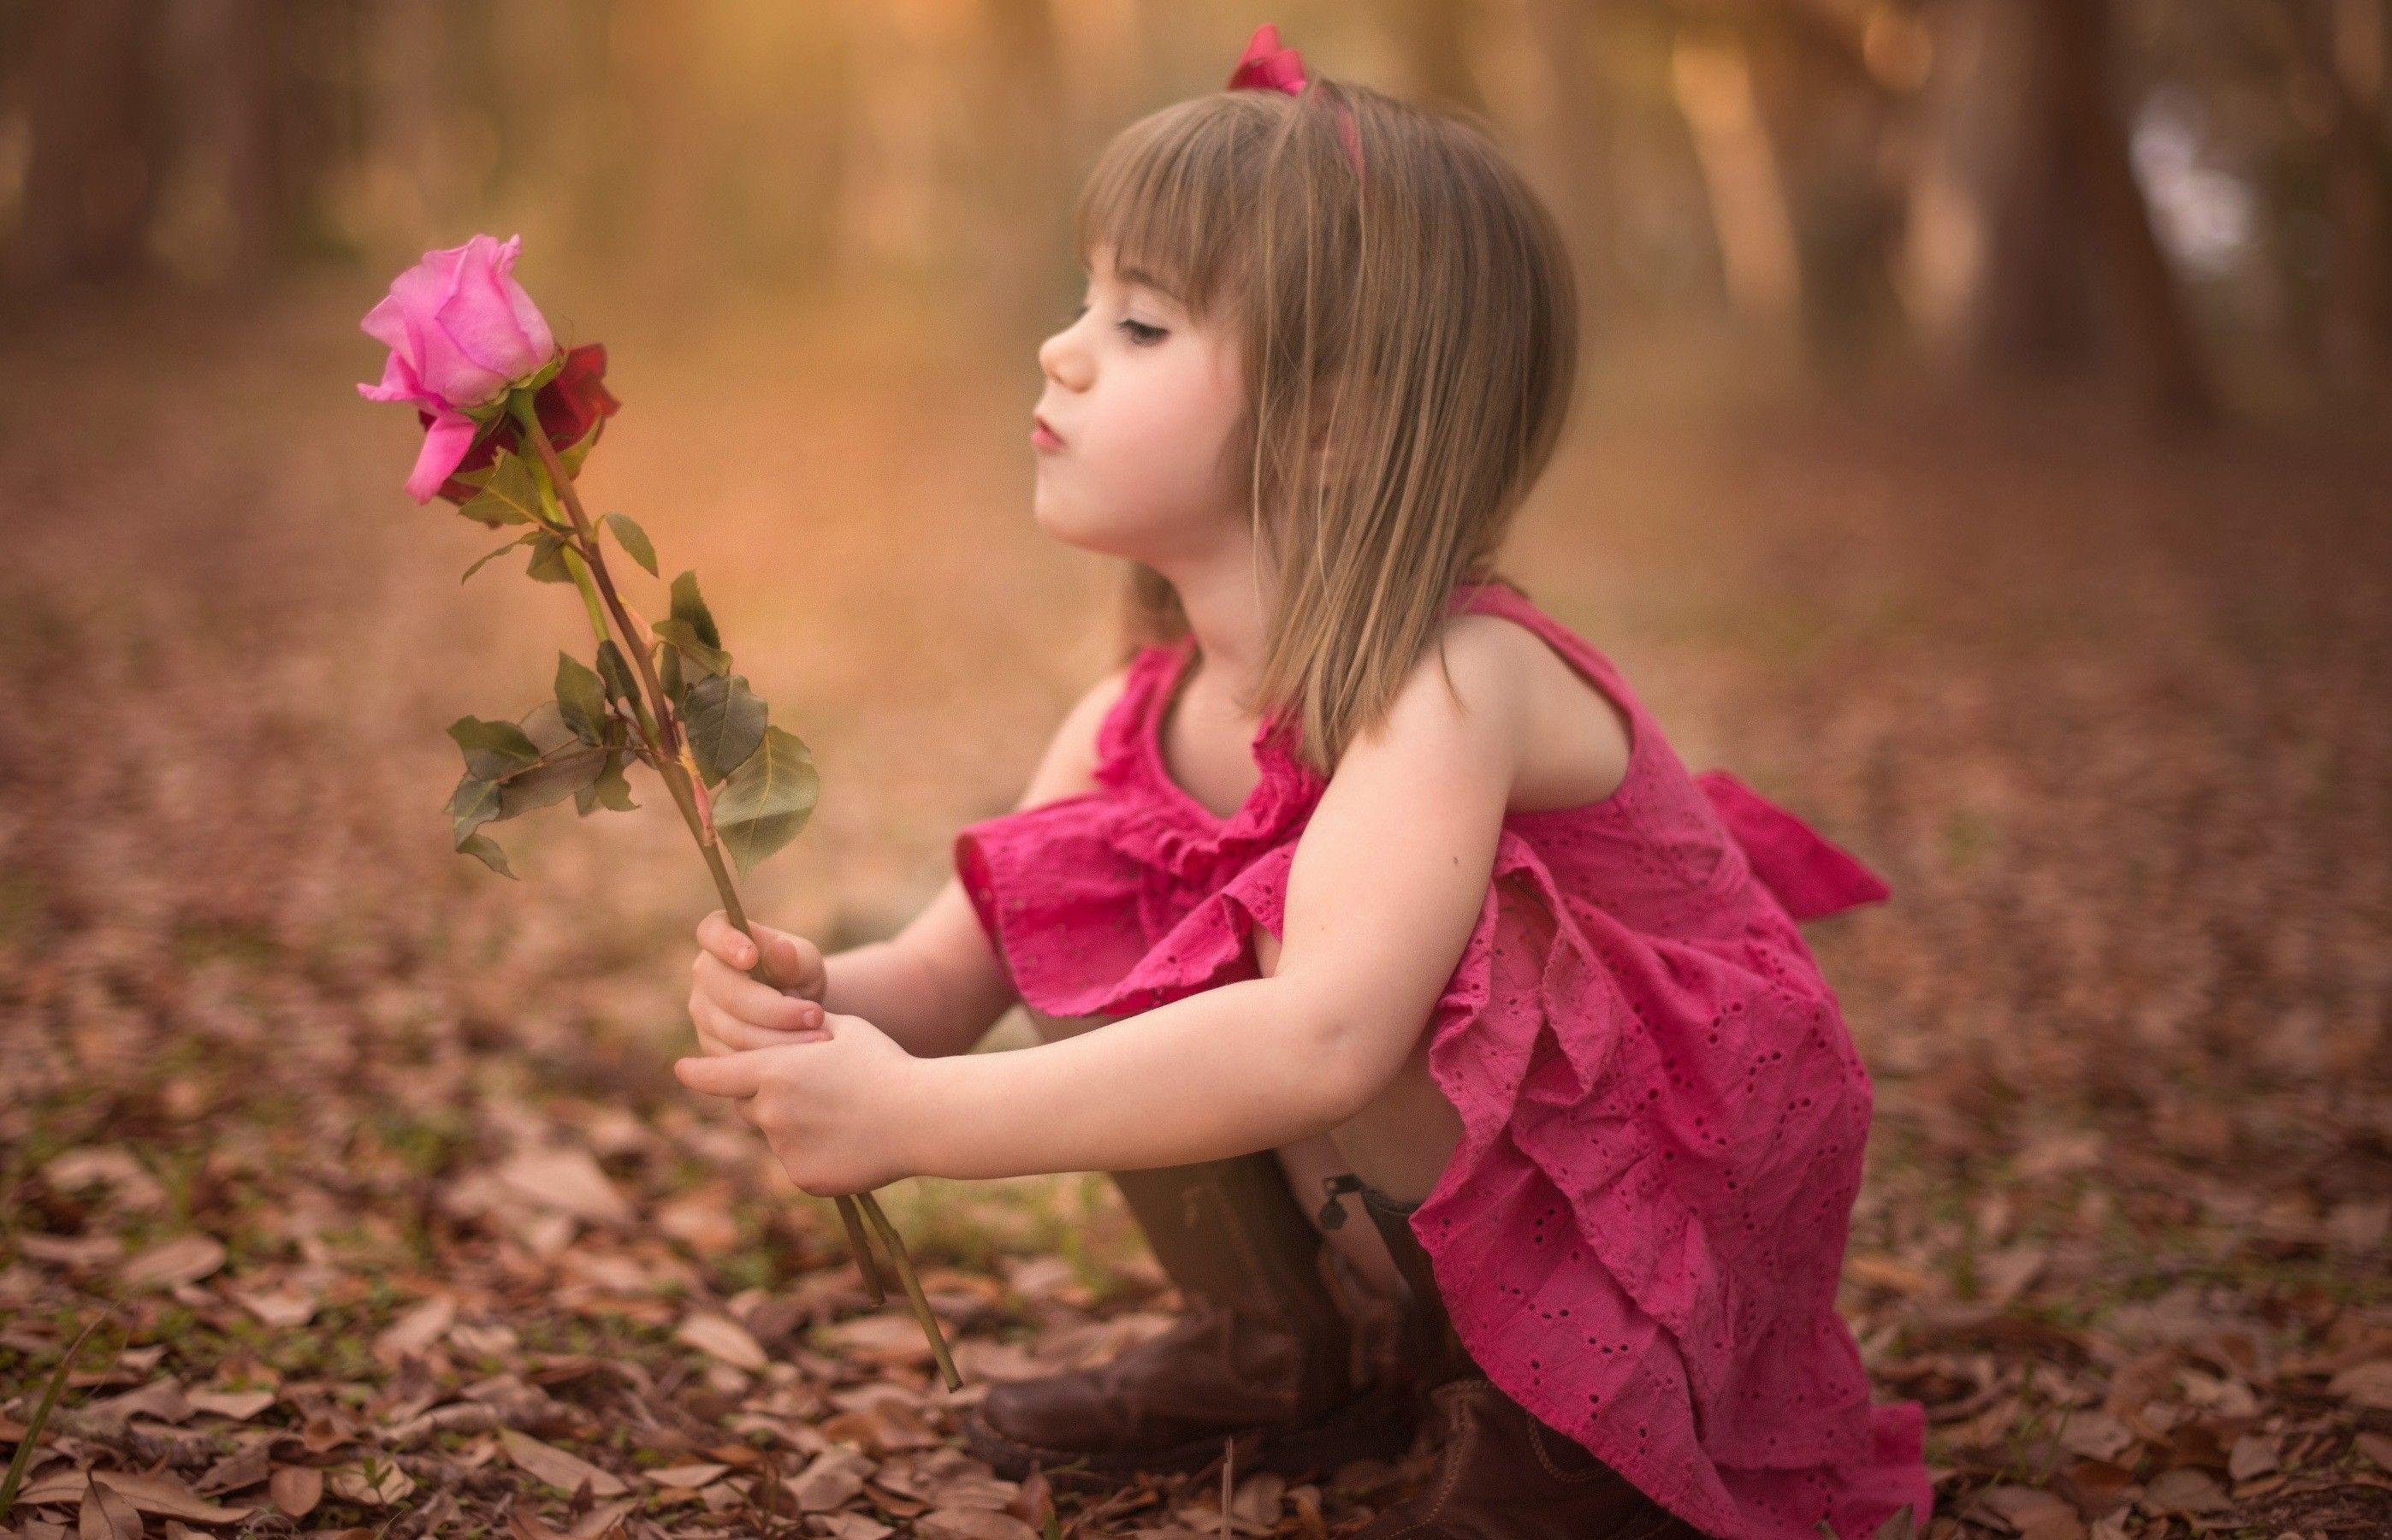 Wallpaper Beautiful Small Child Baby Wall With Lovely Picture Wallpaper Full HD Pics For Smart. Beautiful baby